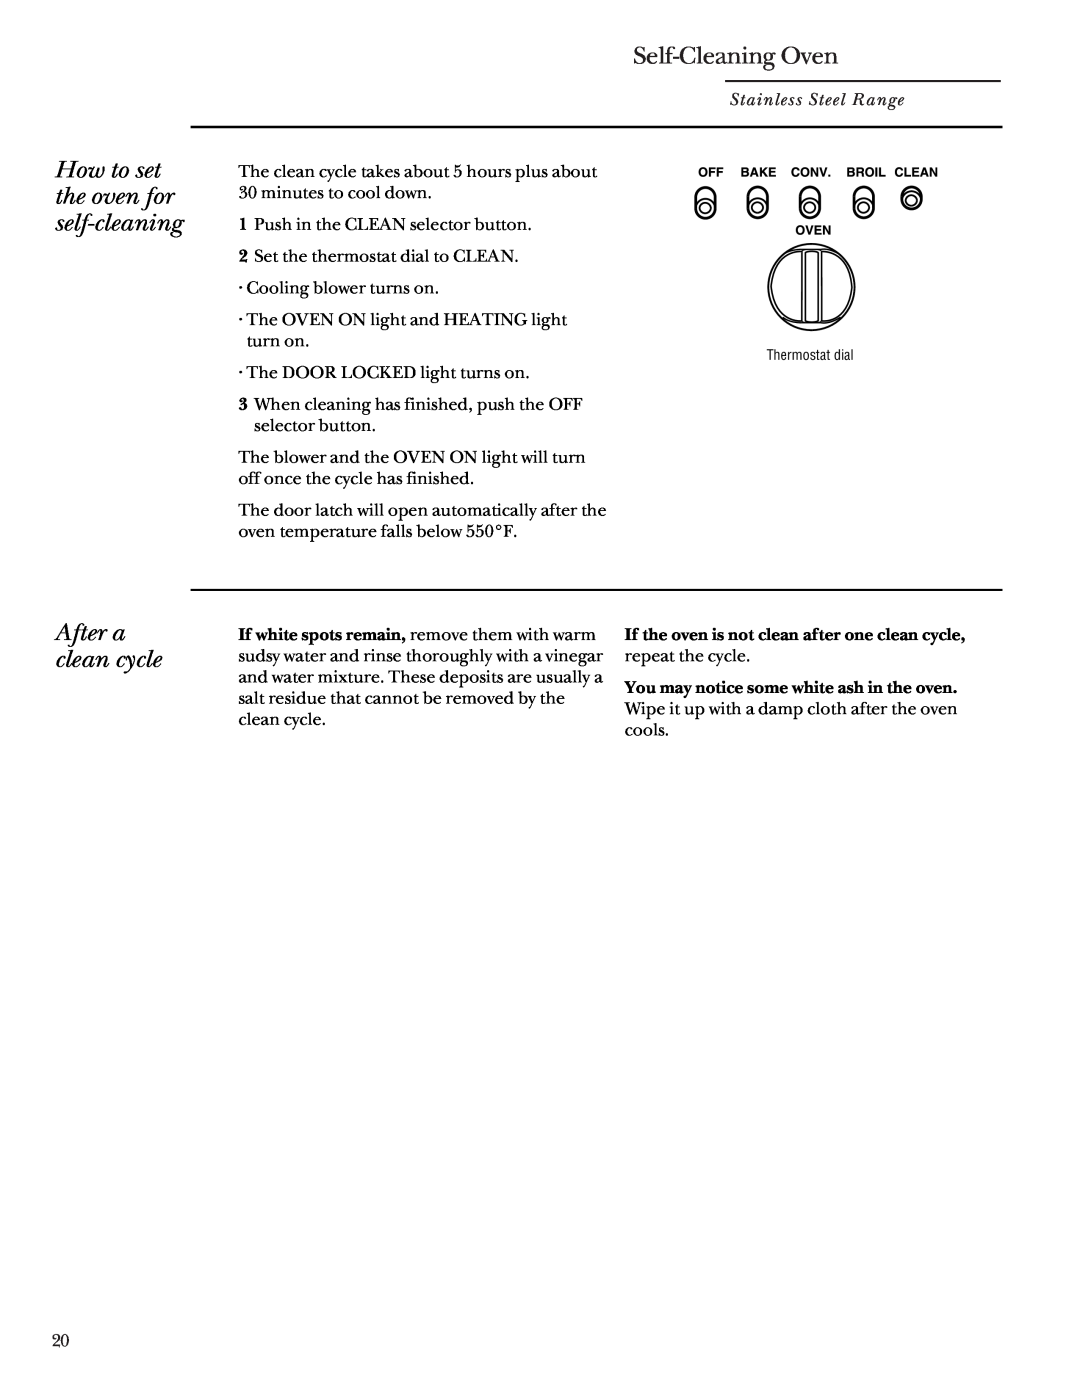 GE Monogram 164D4290P031 owner manual How to set the oven for self-cleaning, After a clean cycle, Self-CleaningOven 